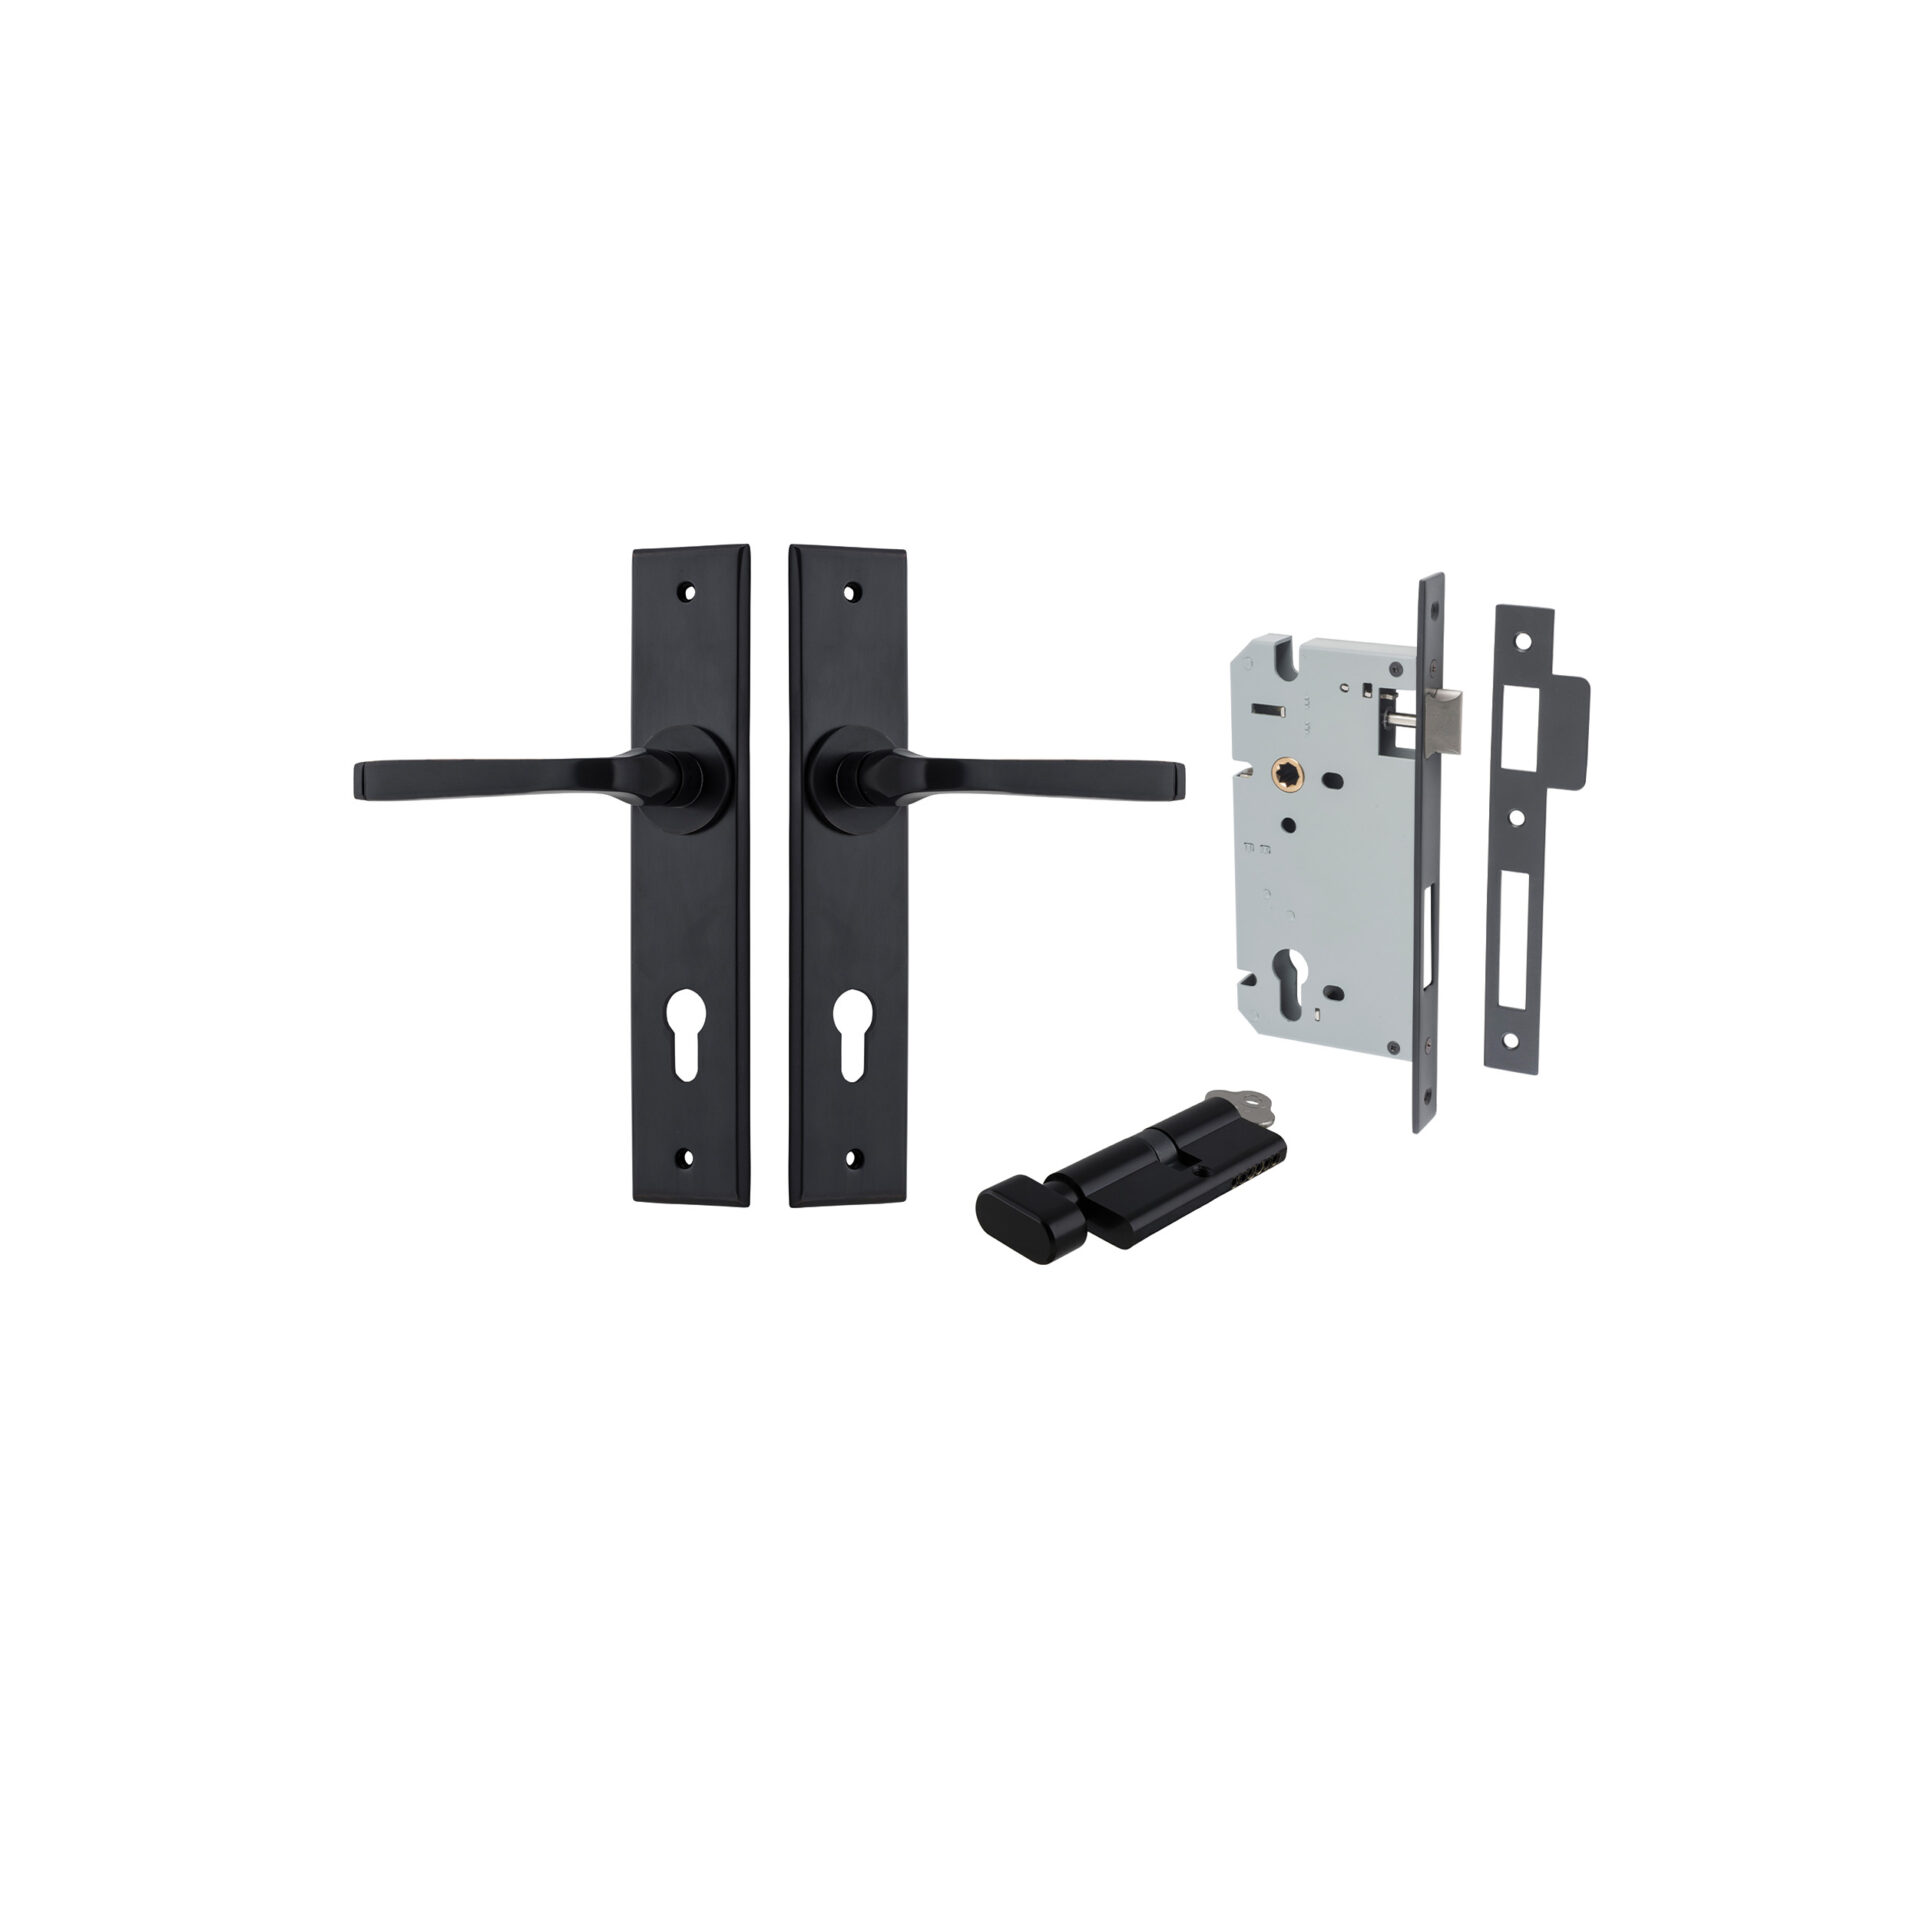 Annecy Lever - Chamfered Backplate Entrance Kit with High Security Lock